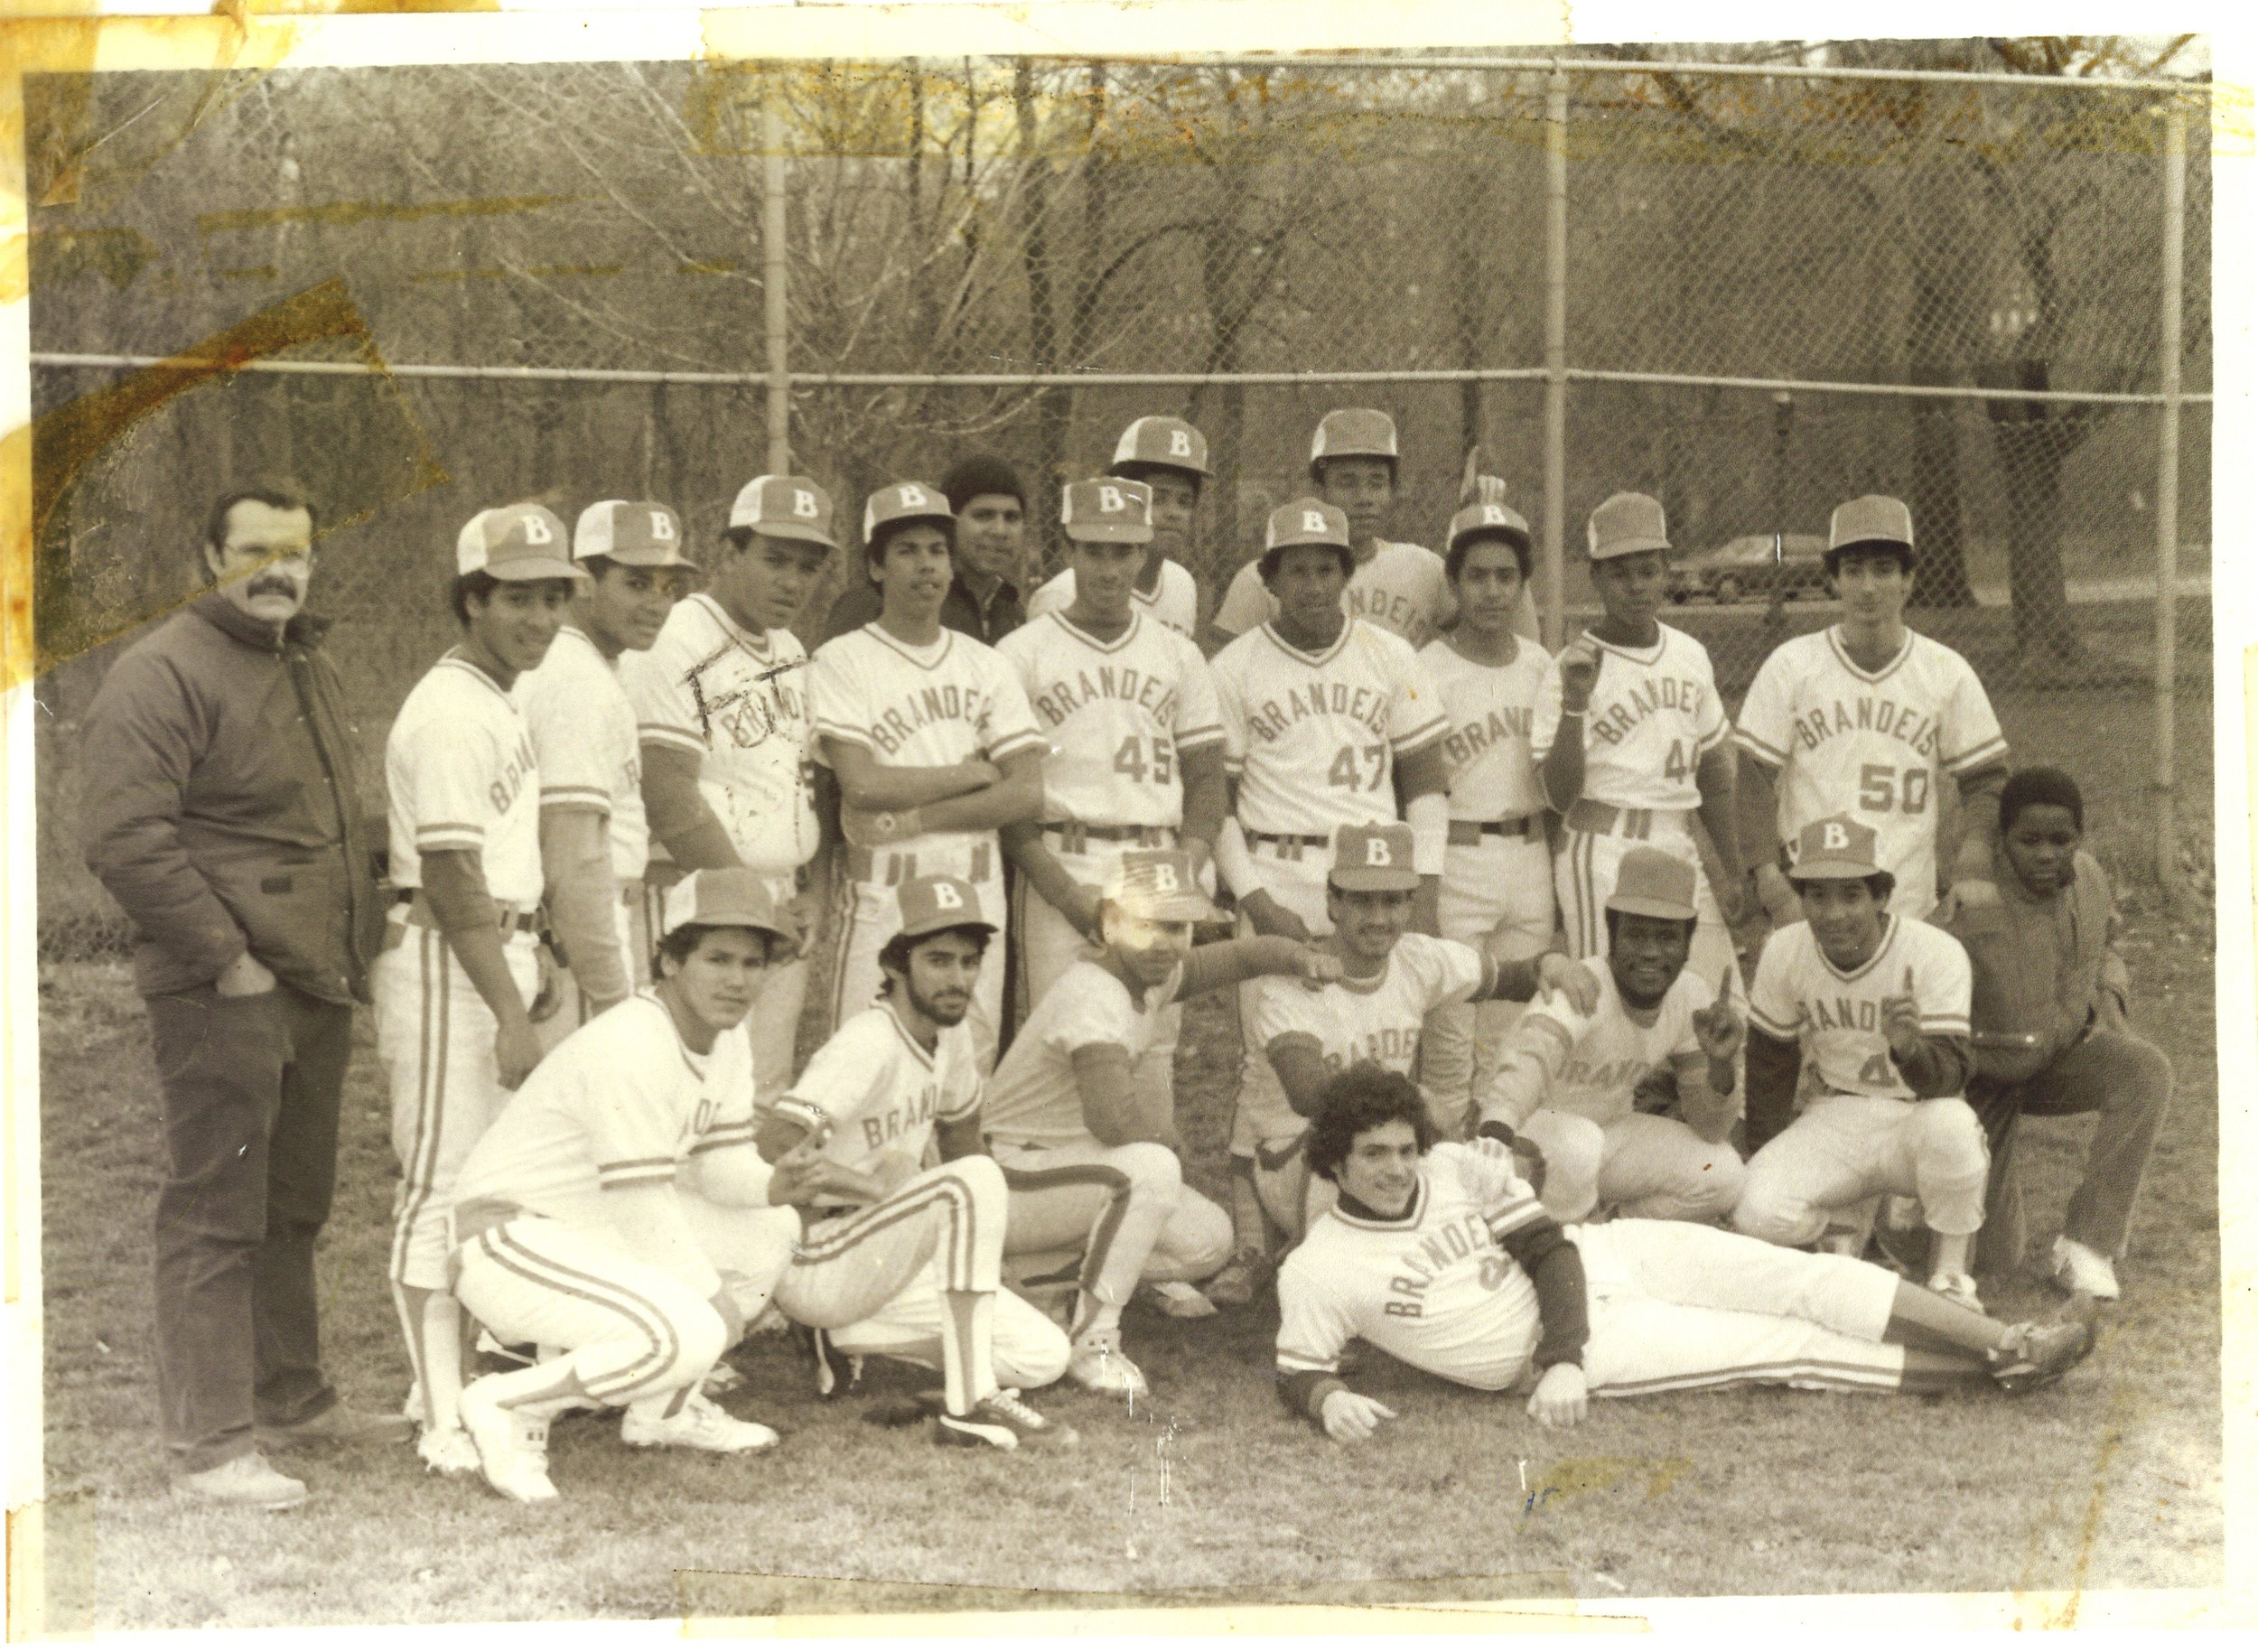   Brandeis High School’s baseball team circa the mid-1980s when I acted as the squad’s statistician. Can you spot me? (Mayor Michael Bloomberg would shutter the school in 2014 as part of his policy to improve public education.)  